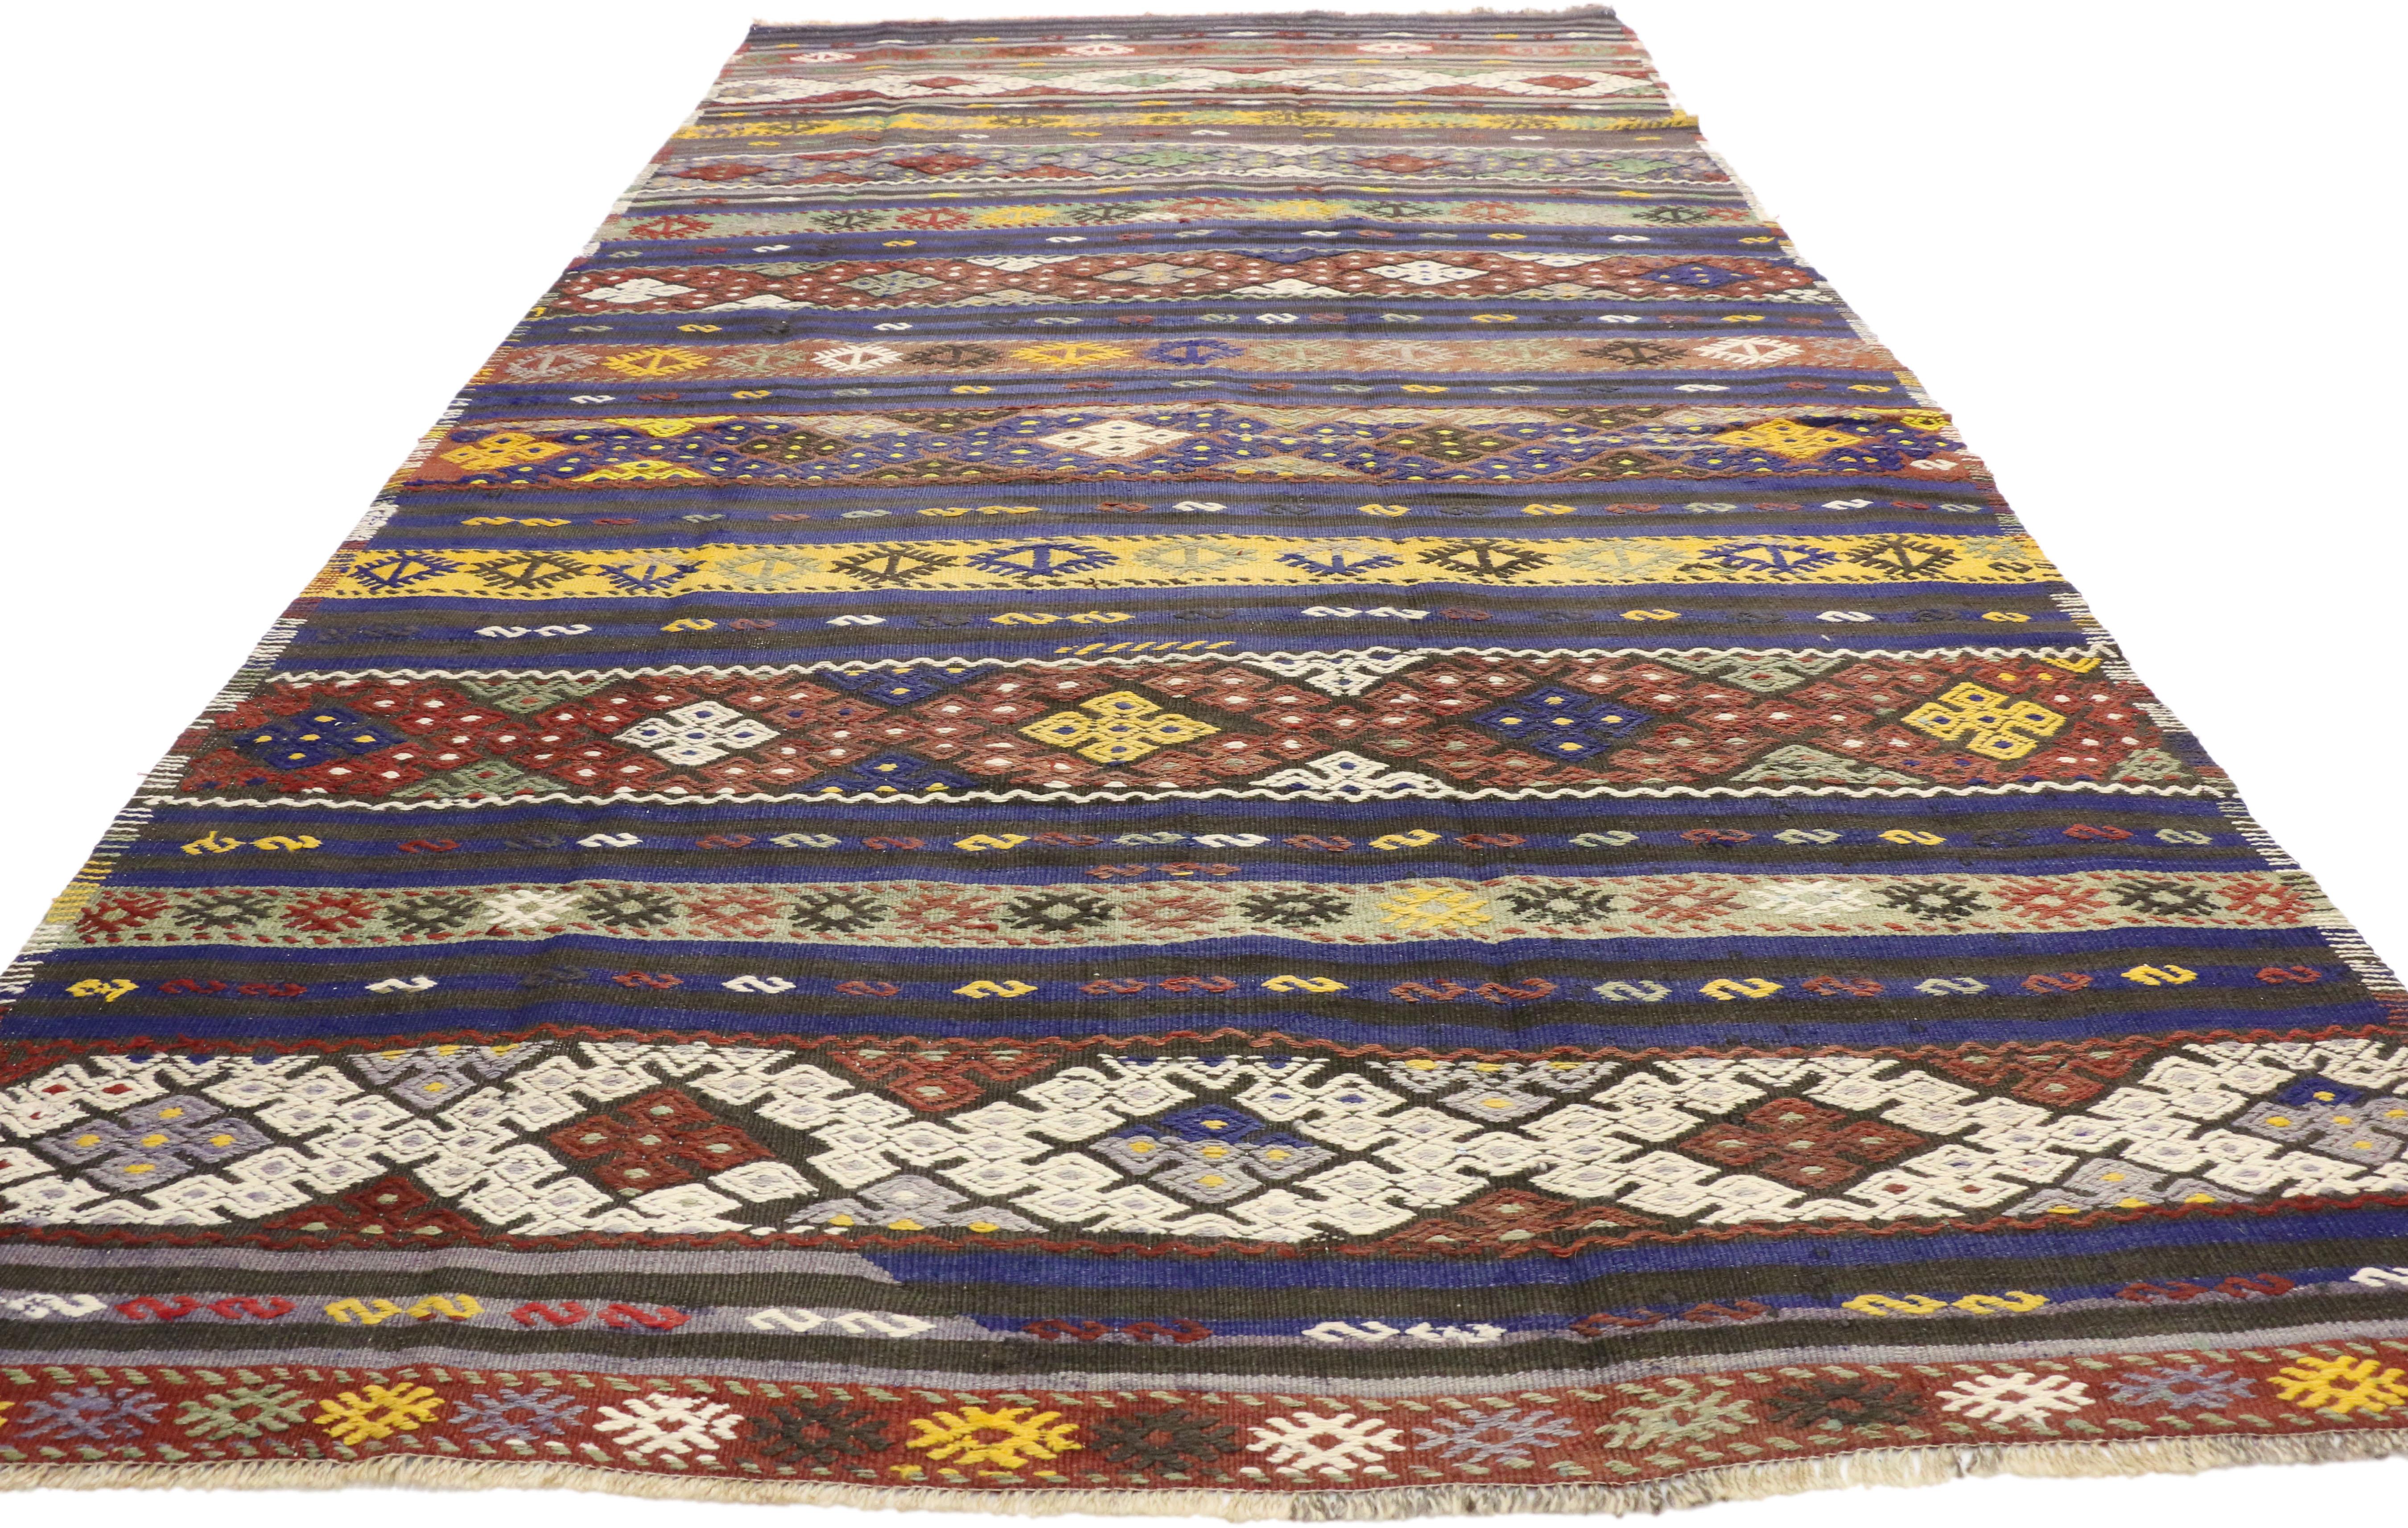 Hand-Woven Vintage Turkish Kilim Striped Rug with Bohemian Tribal Style, Flat-Weave Rug